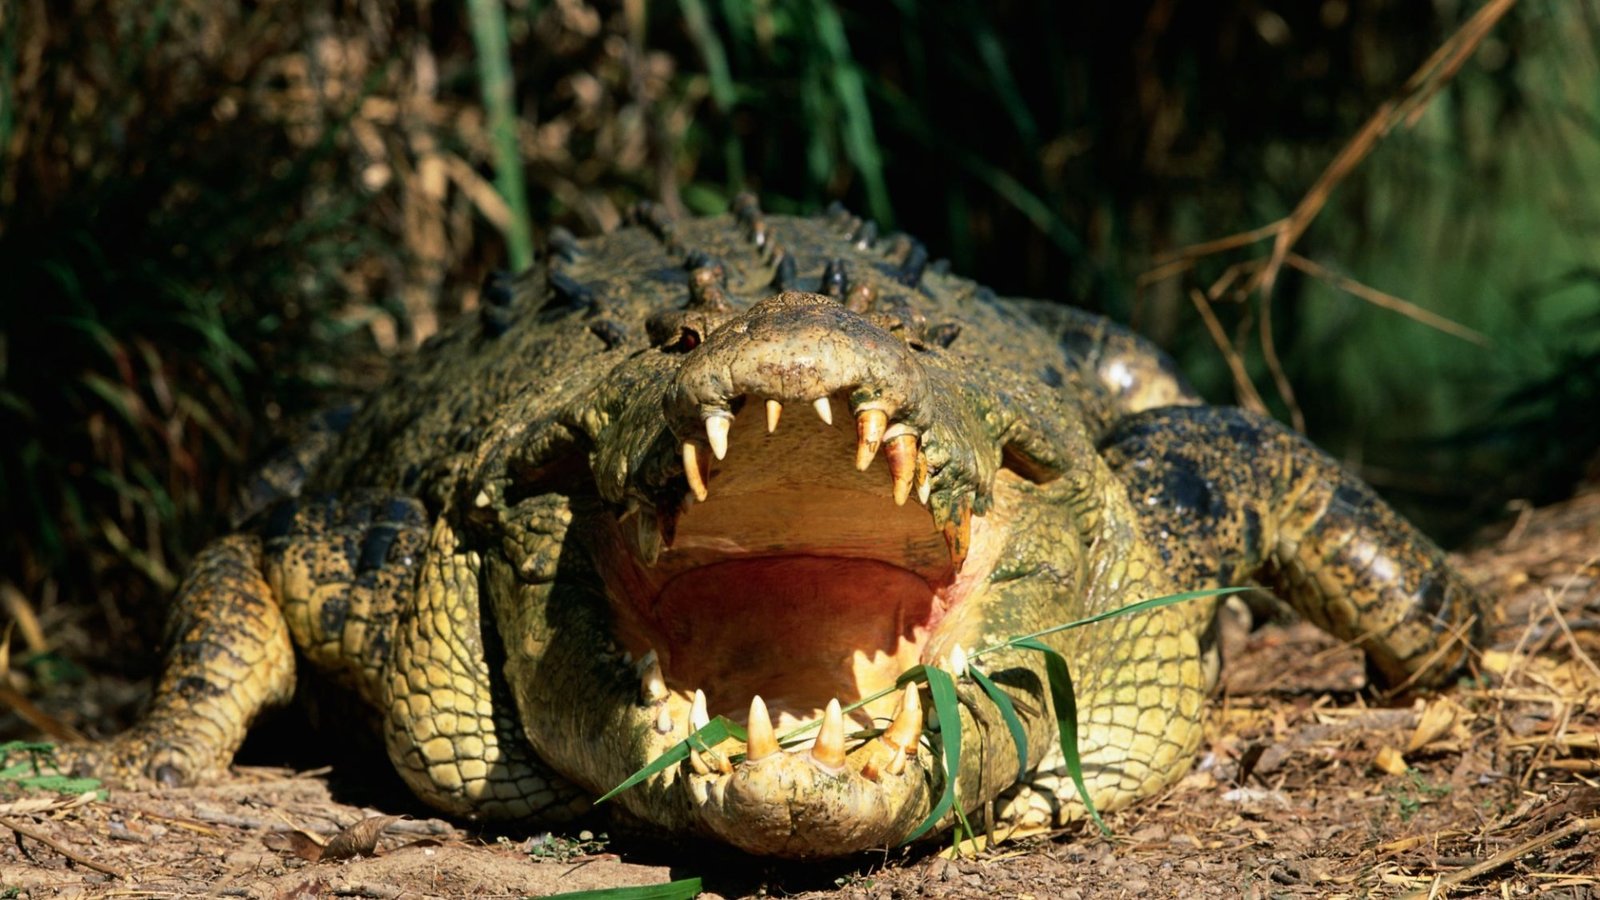 Worlds deadliest animal attack saw crocodiles eat 500 soldiers alive with their comrades hearing chilling screams